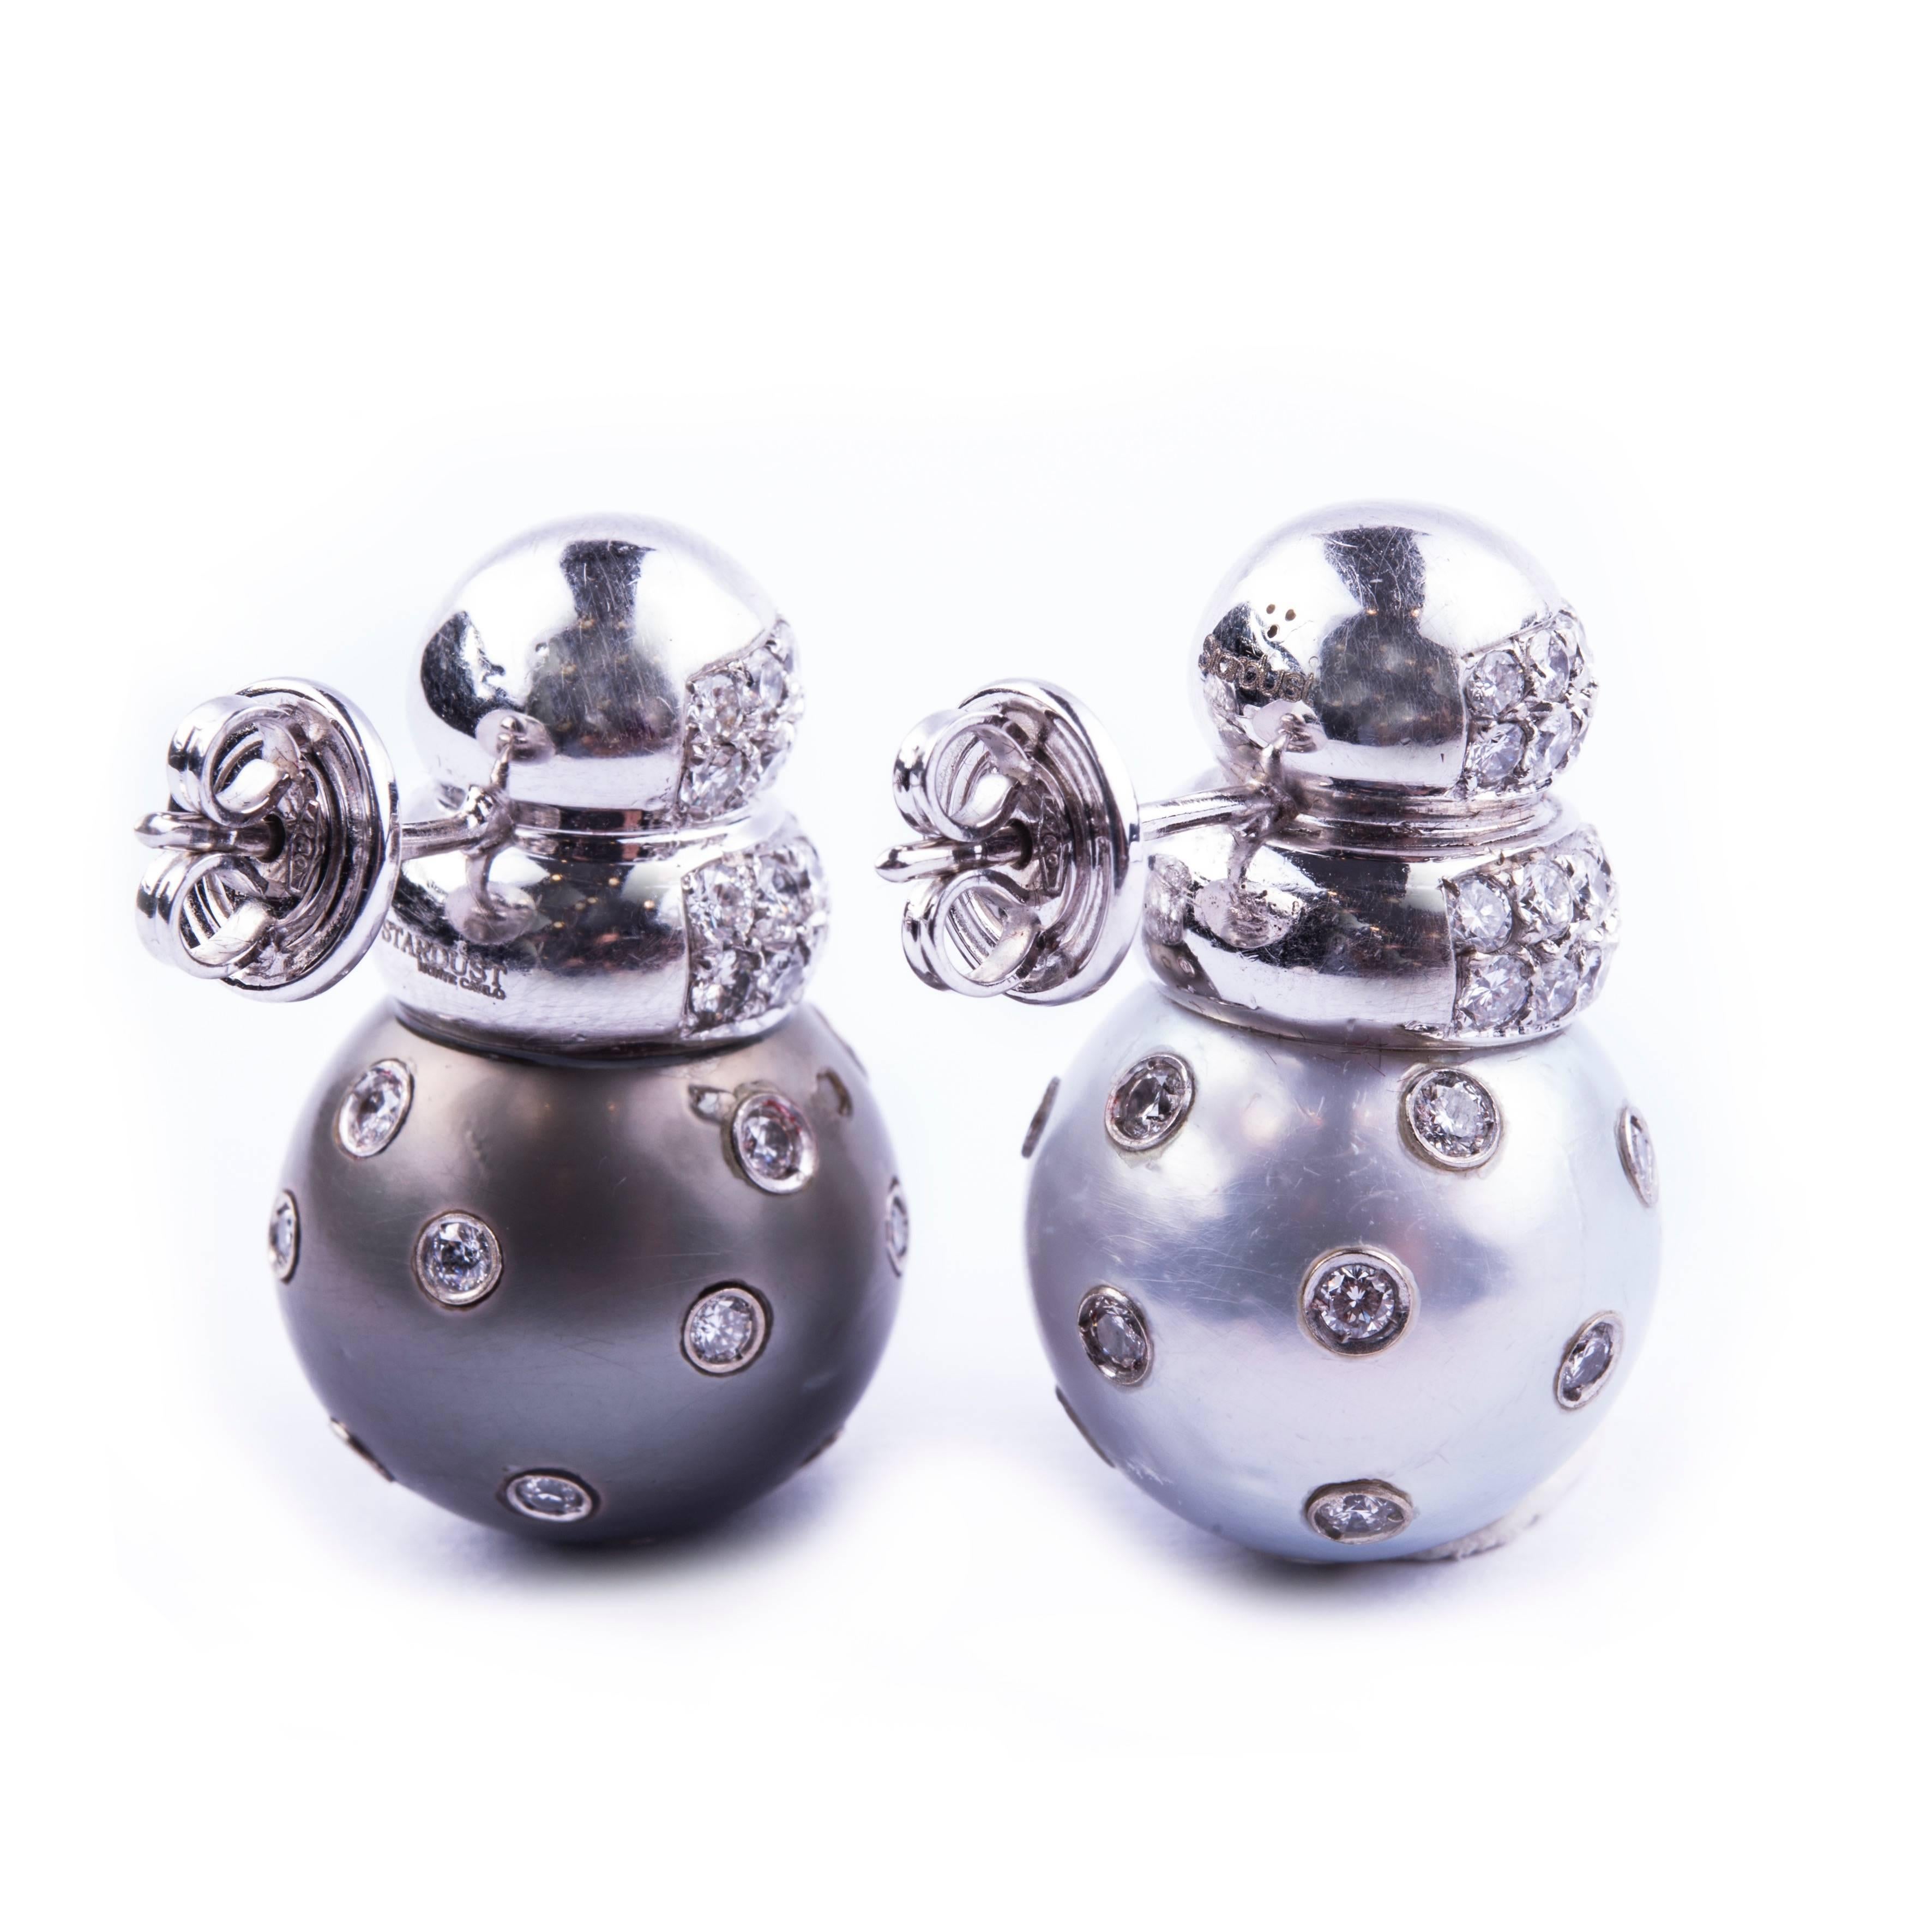 Very classy pearl and diamond earrings featuring one South Sea and one Tahitian pearl. Both pearls are set with diamonds.
The total carat weight is approximately 7 ct. 